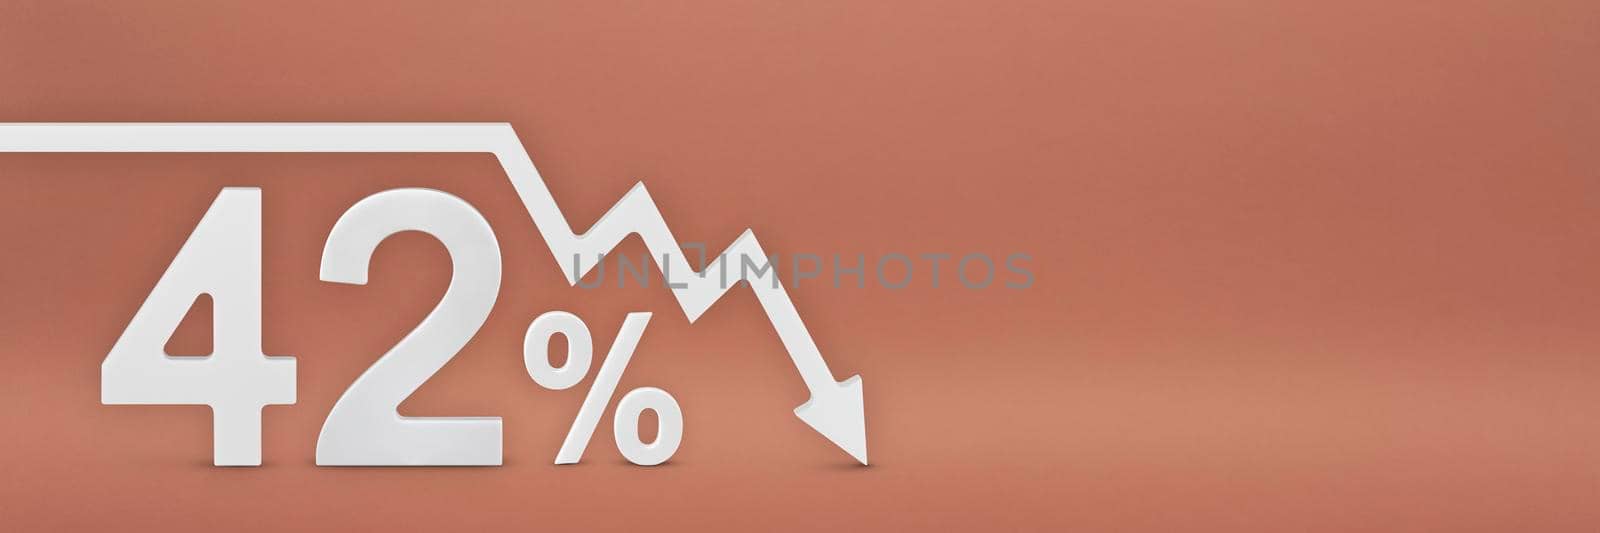 forty-two percent, the arrow on the graph is pointing down. Stock market crash, bear market, inflation.Economic collapse, collapse of stocks.3d banner,42 percent discount sign on a red background. by SERSOL